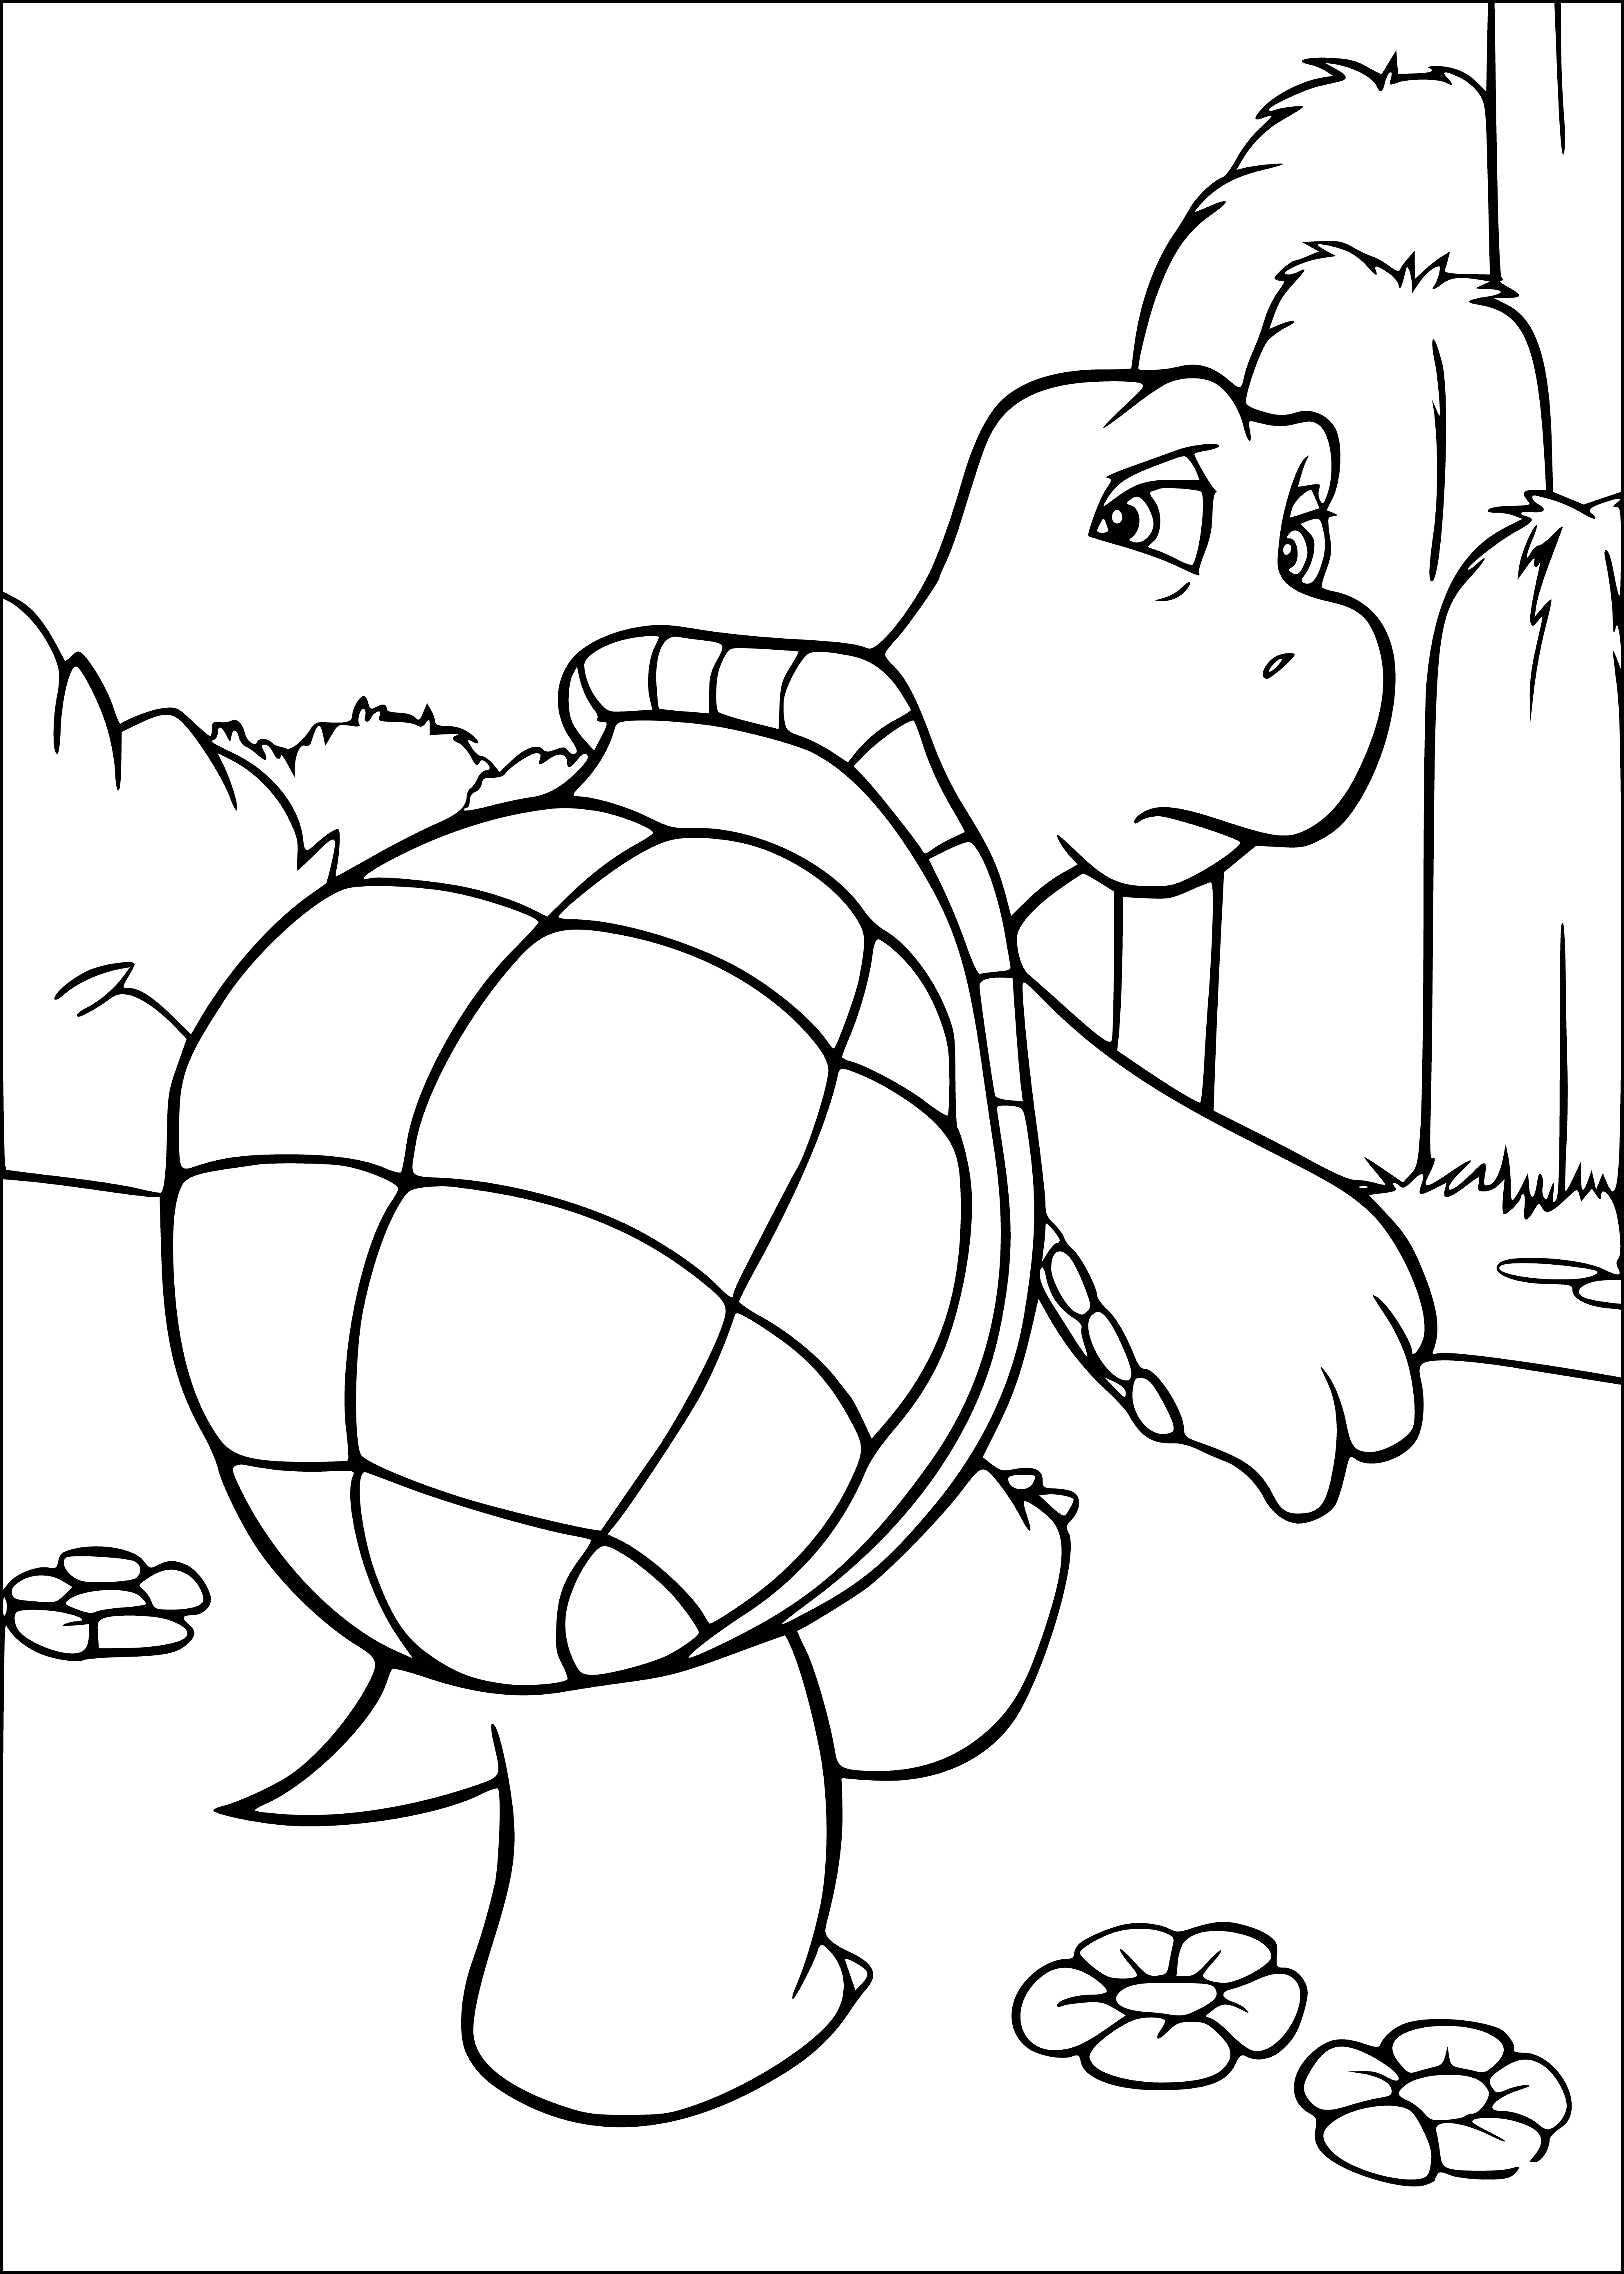 Reptile turtle coloring page